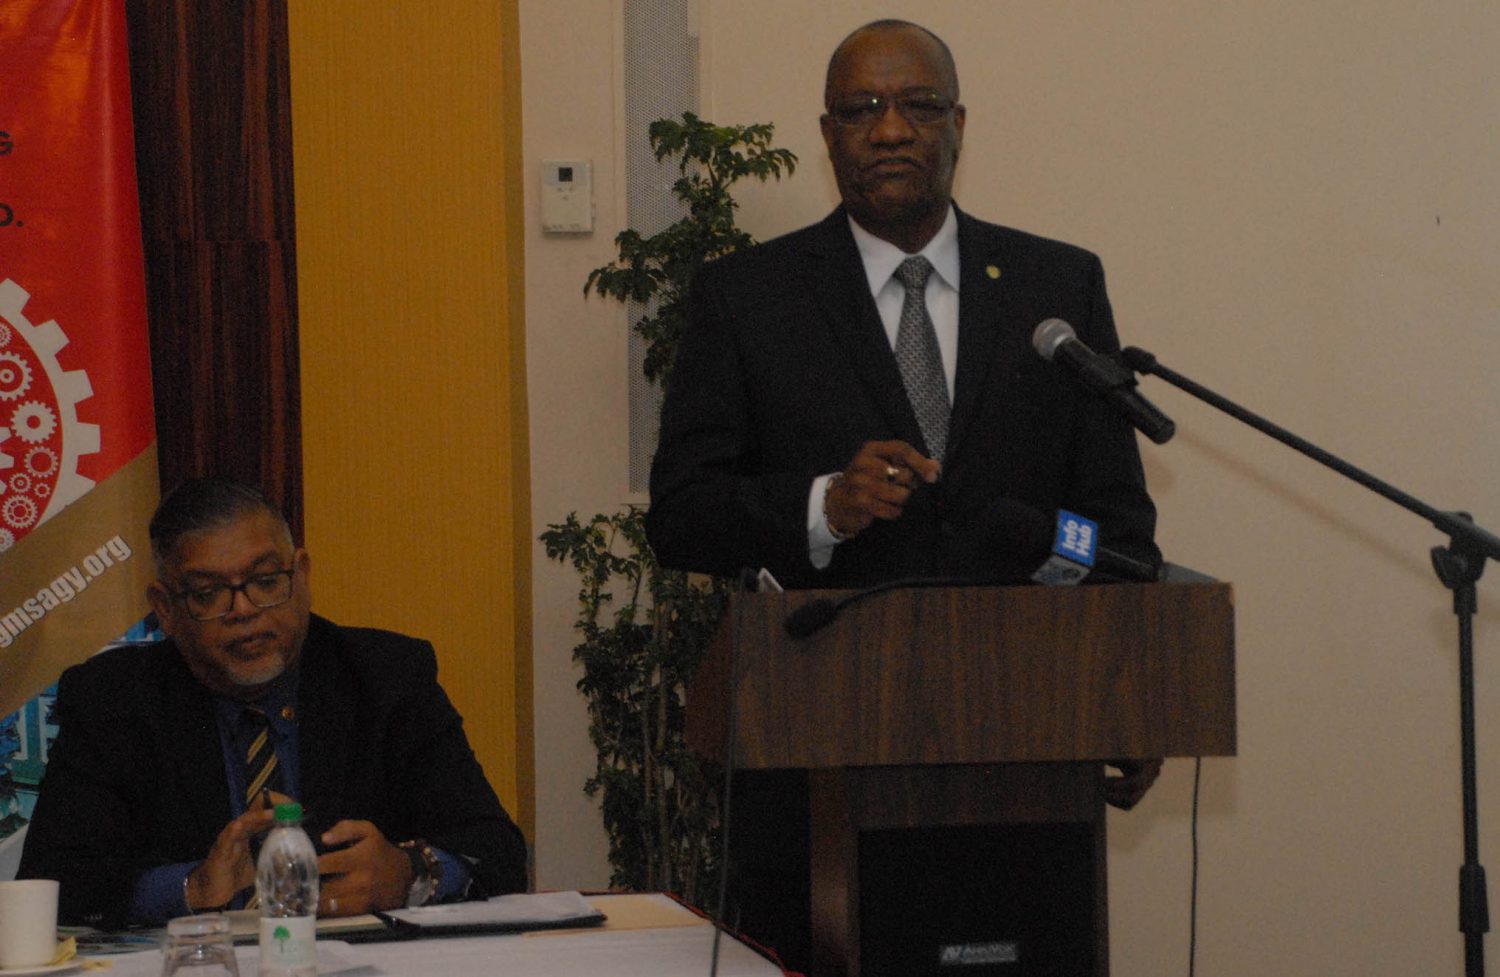 Minister of State Joseph Harmon addressing the GMSA’s Annual General Meeting on Wednesday. Seated next to Minister harmon is GMSA Executive Meneber Ramesh Dookoo